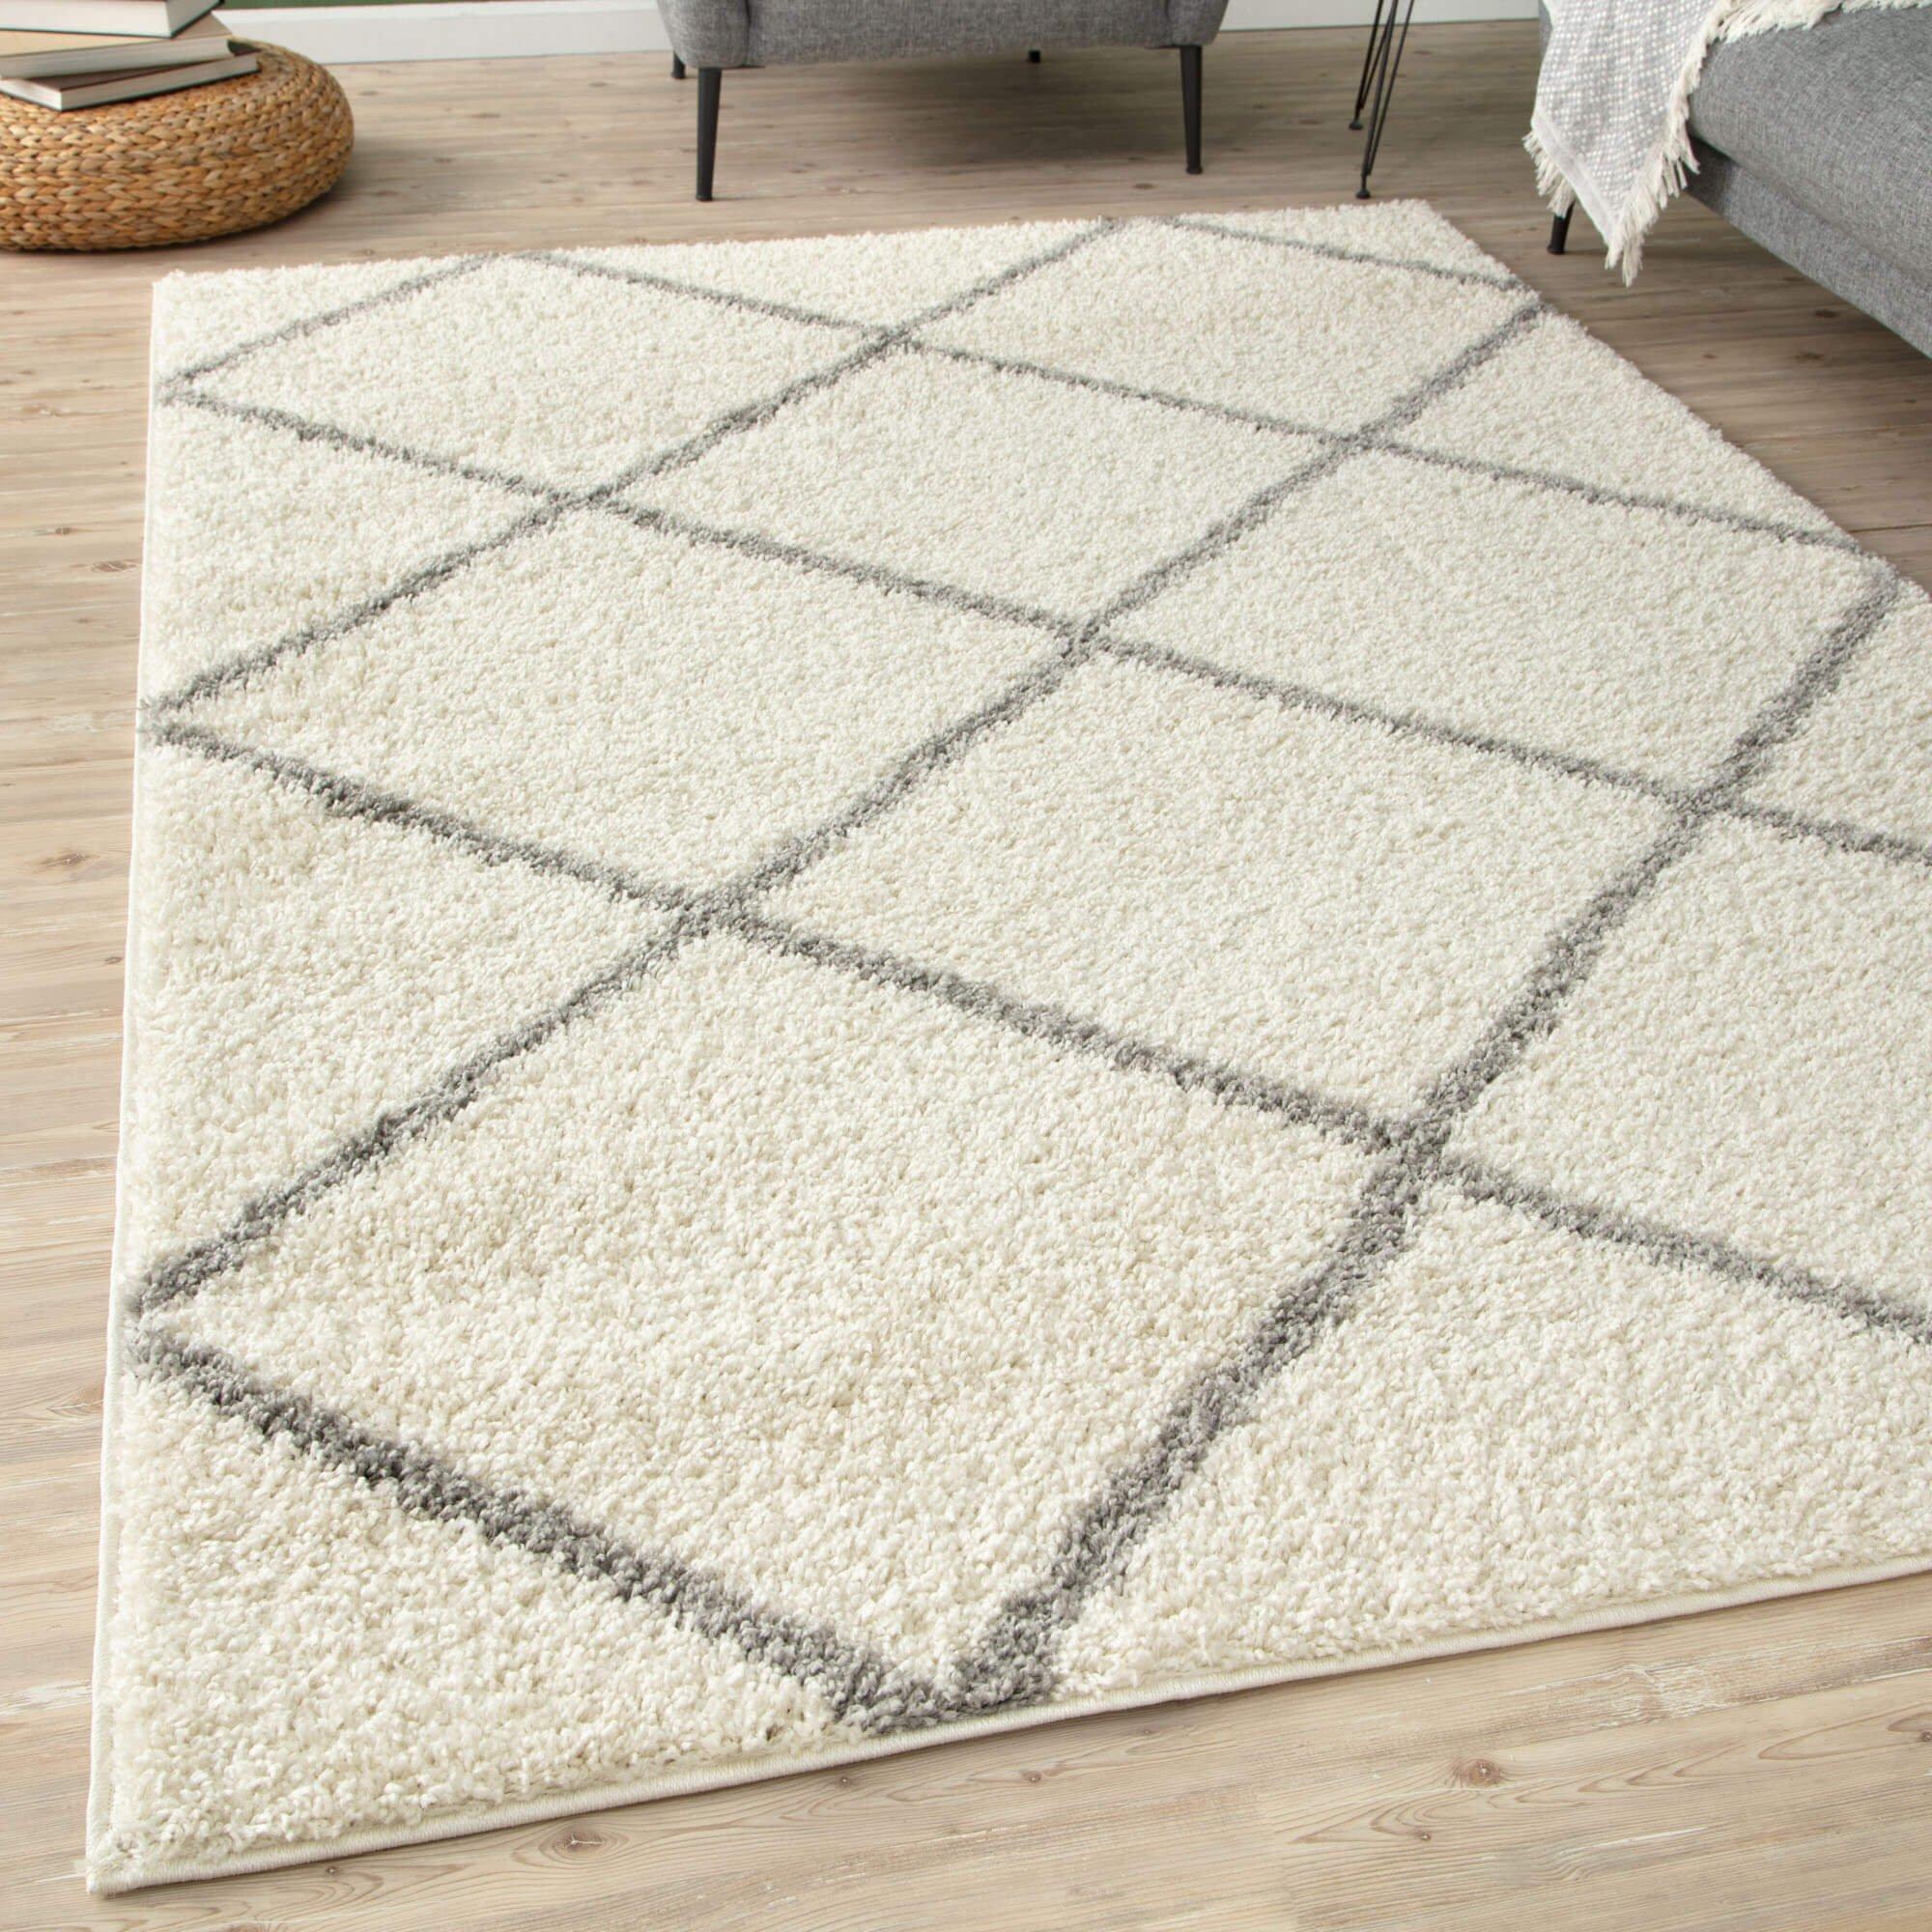 Myshaggy Collection Rugs Diamond Design in Ivory - 383 IG